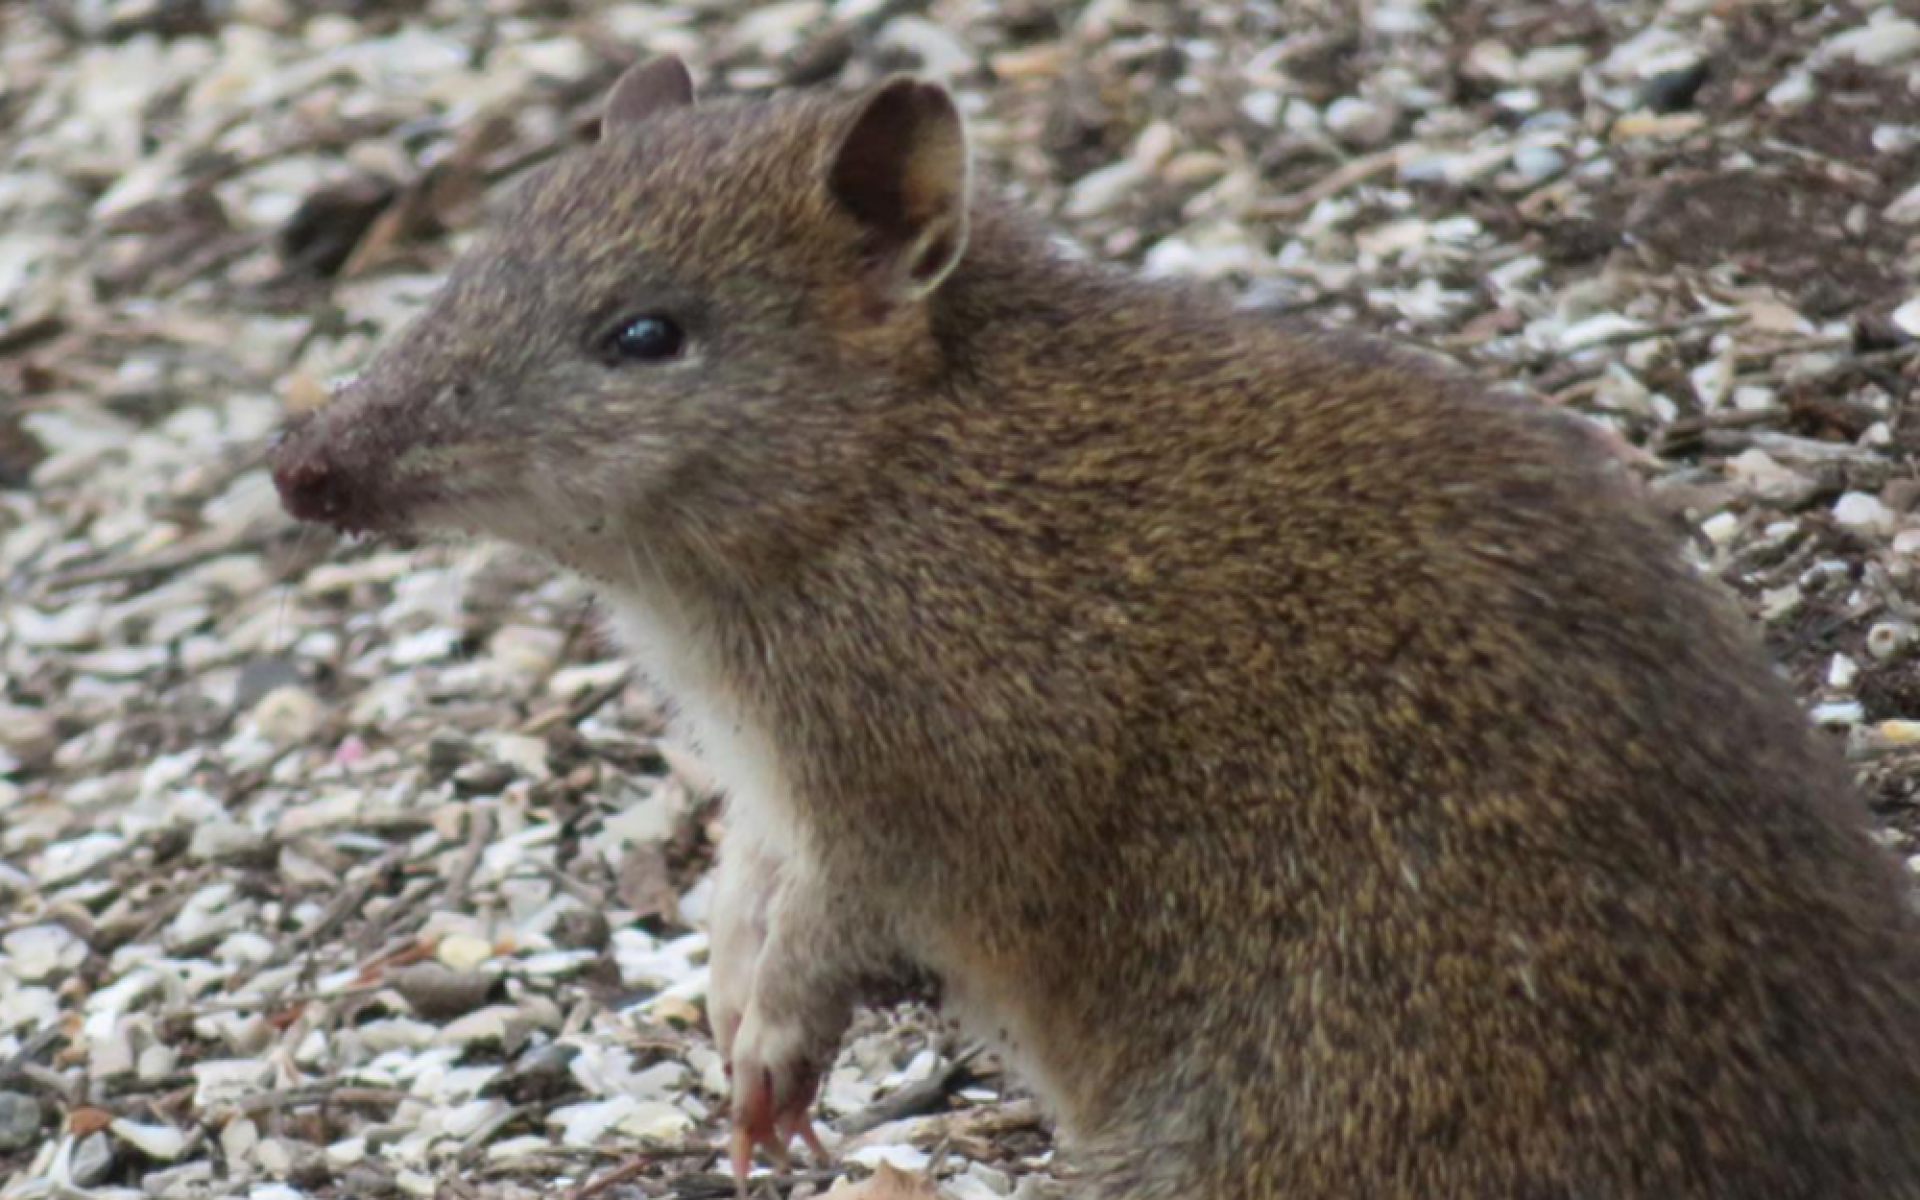 Southern brown bandicoots have a stocky body with a short snout and short, rounded ears.